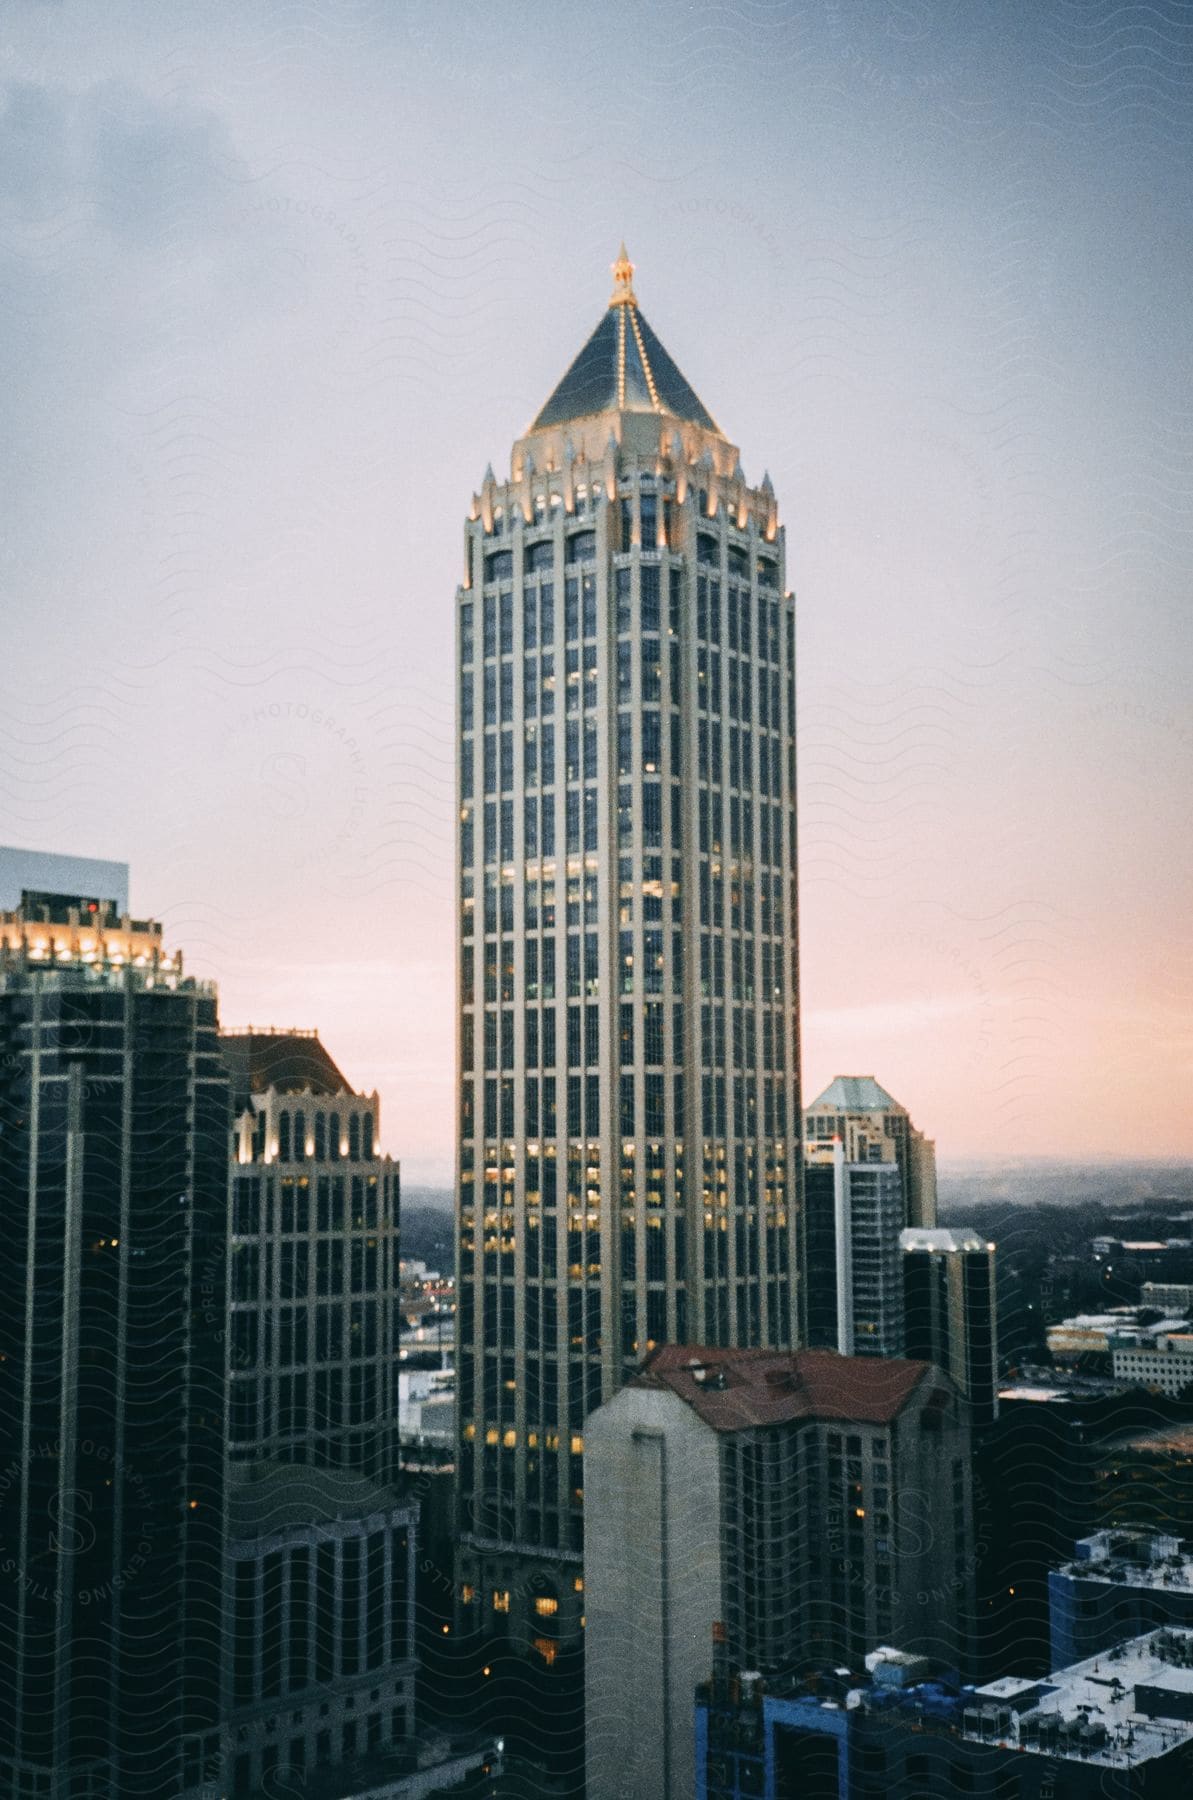 A tall tower overlooks buildings and the city of Atlanta